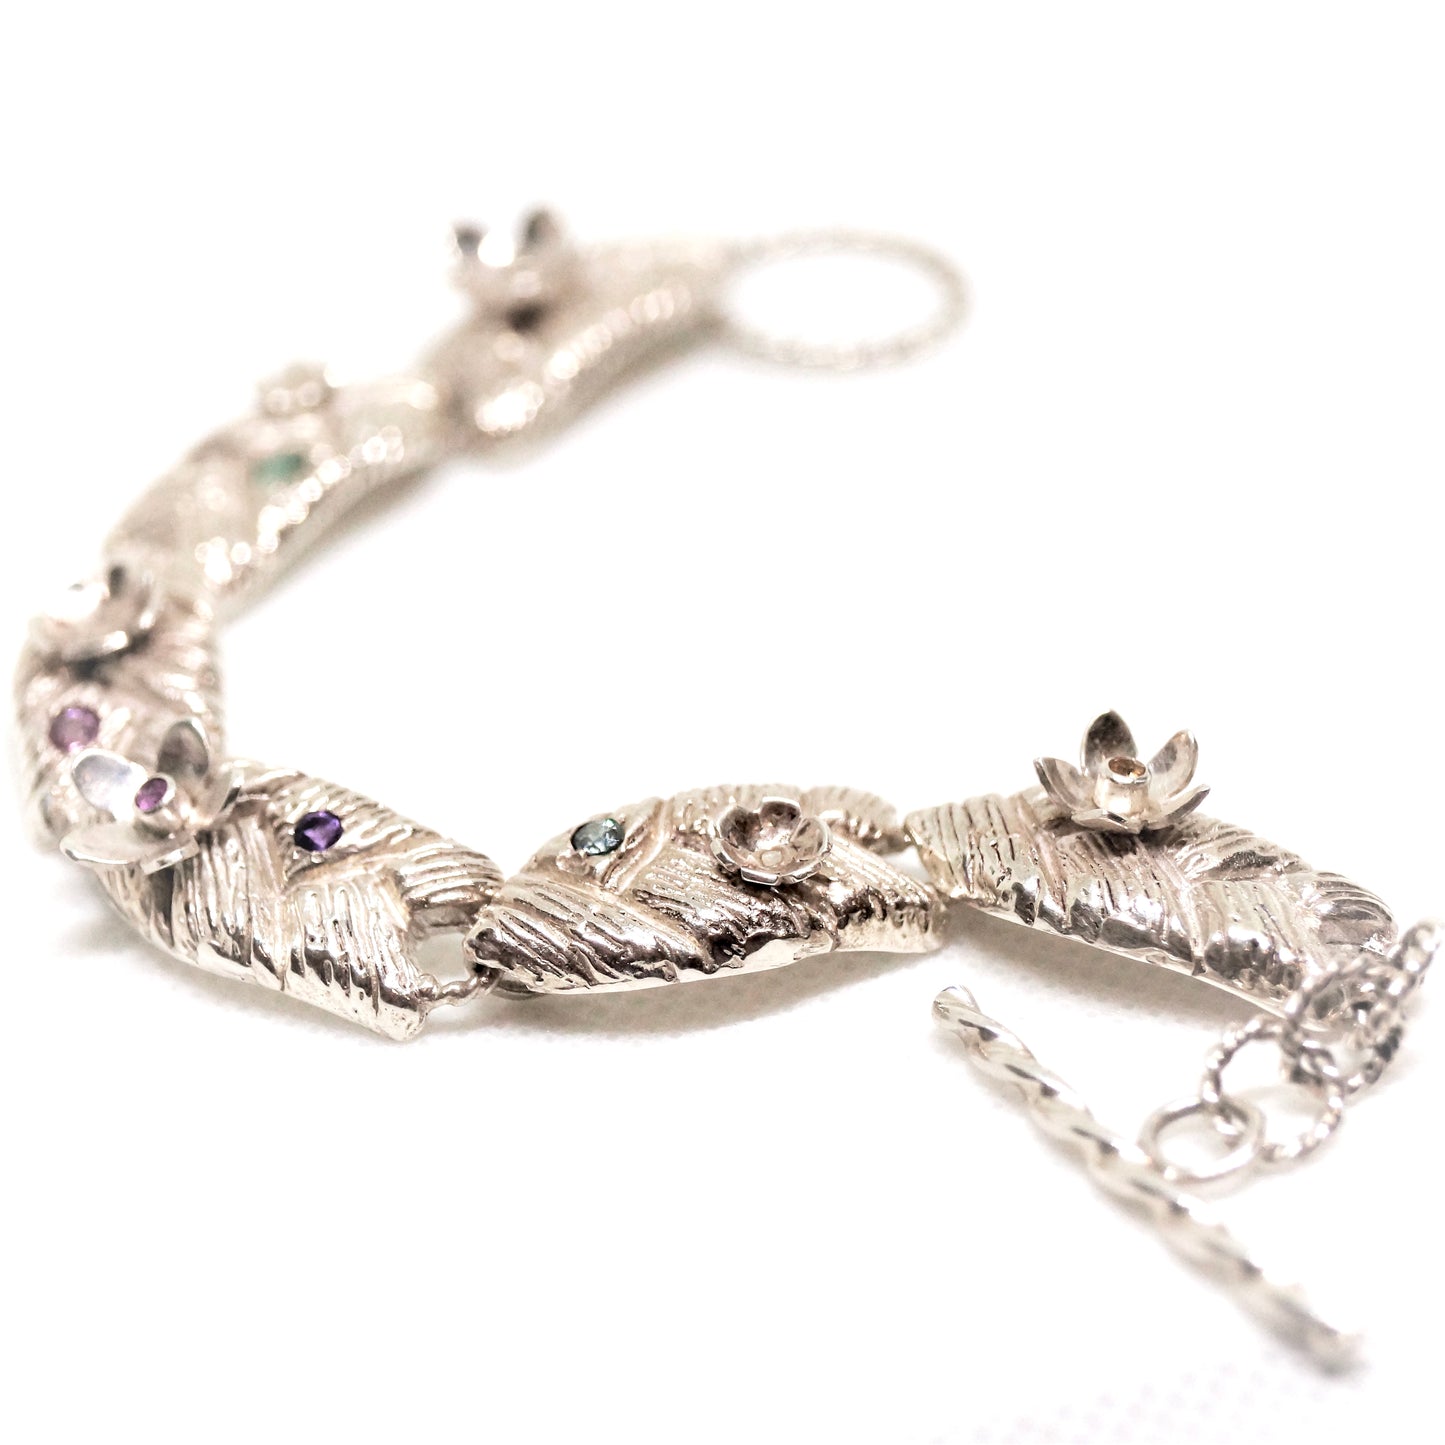 Sterling silver bracelet with flowers and gemstones